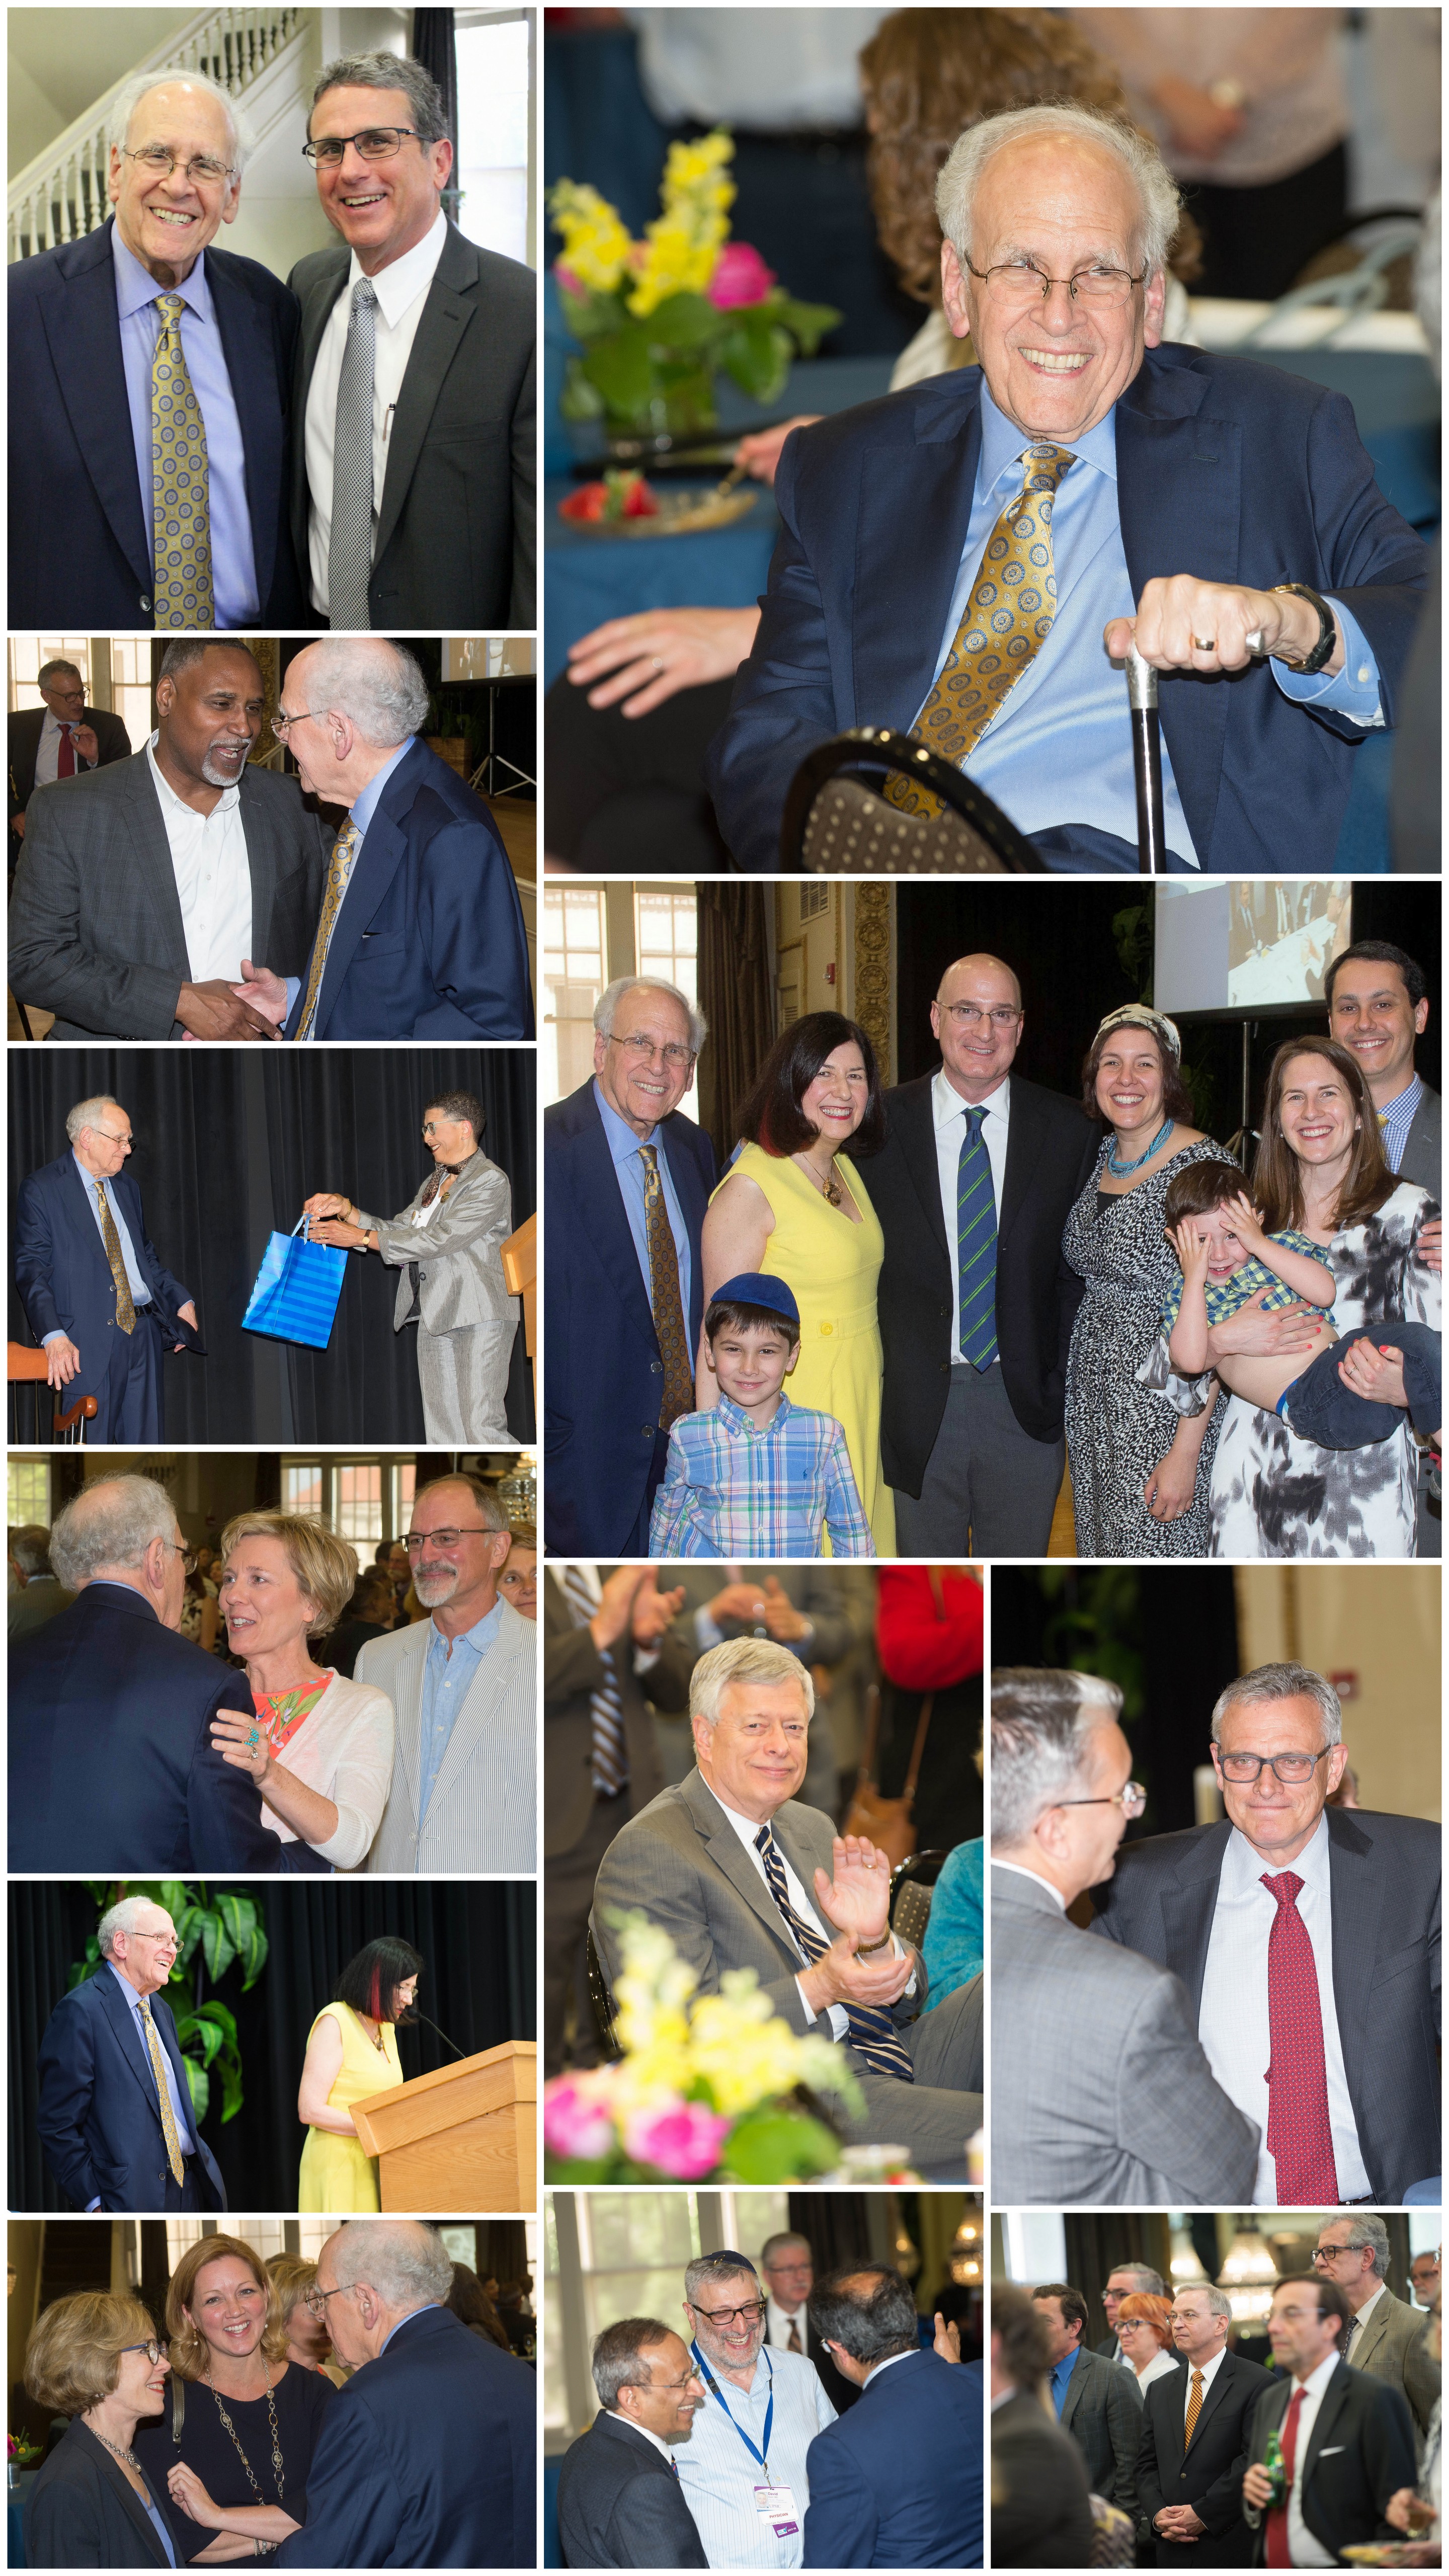 Celebrating the Career of Dr. Loren Roth